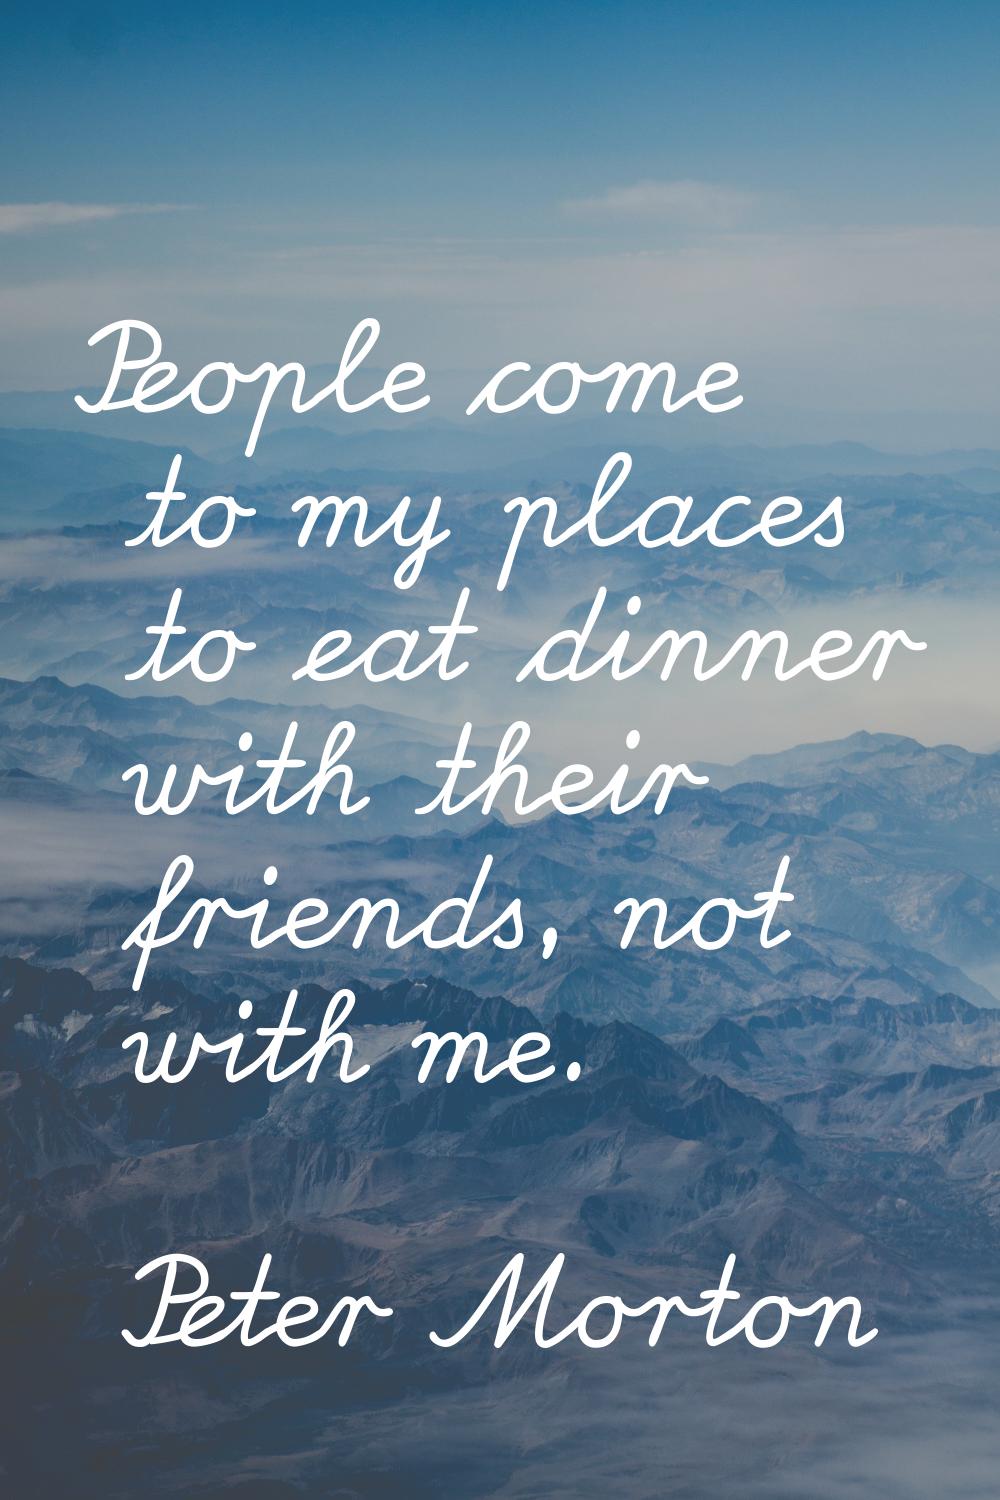 People come to my places to eat dinner with their friends, not with me.